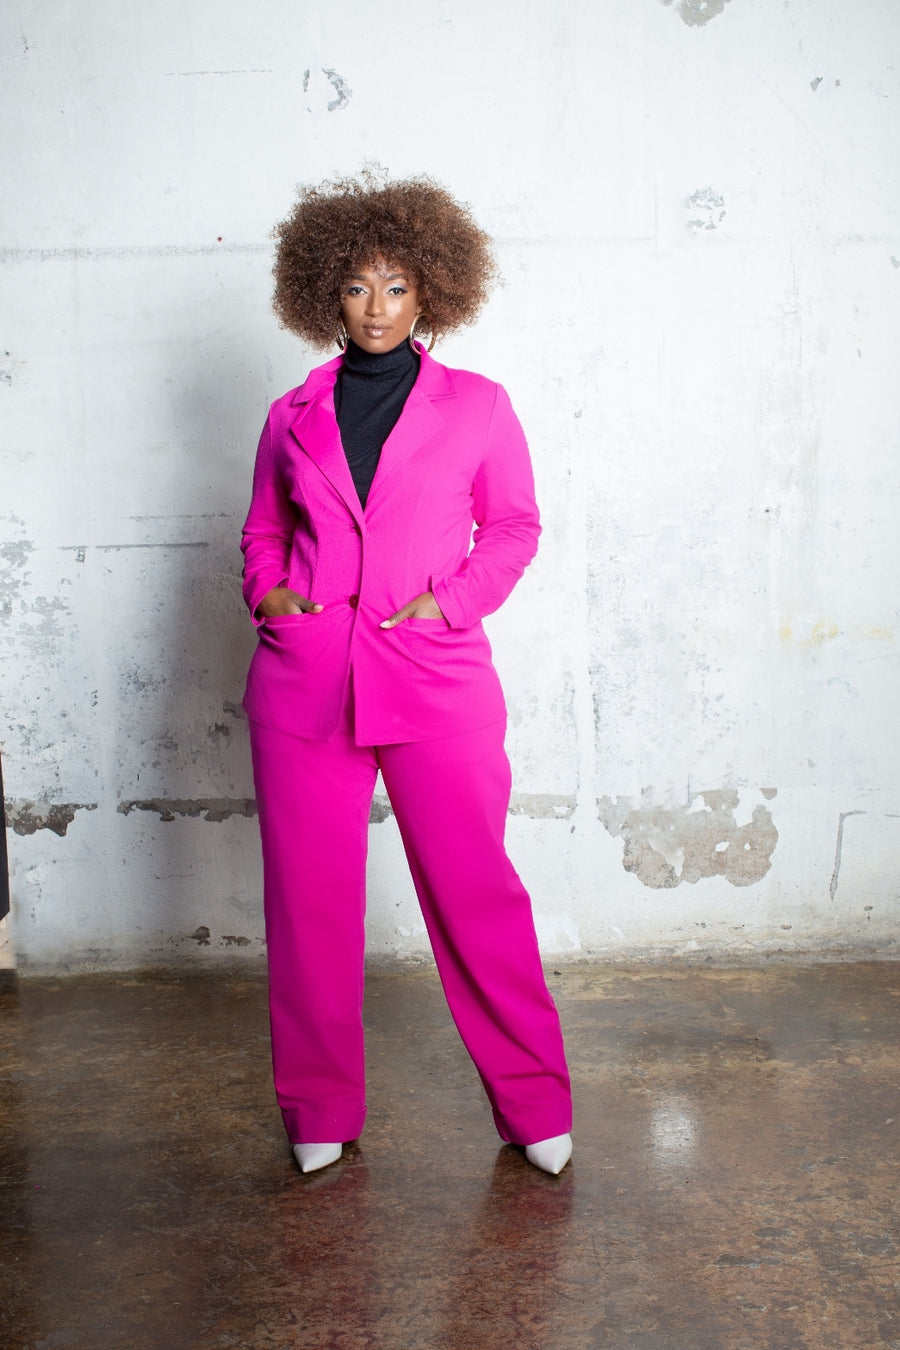 I have fallen for a hot-pink suit